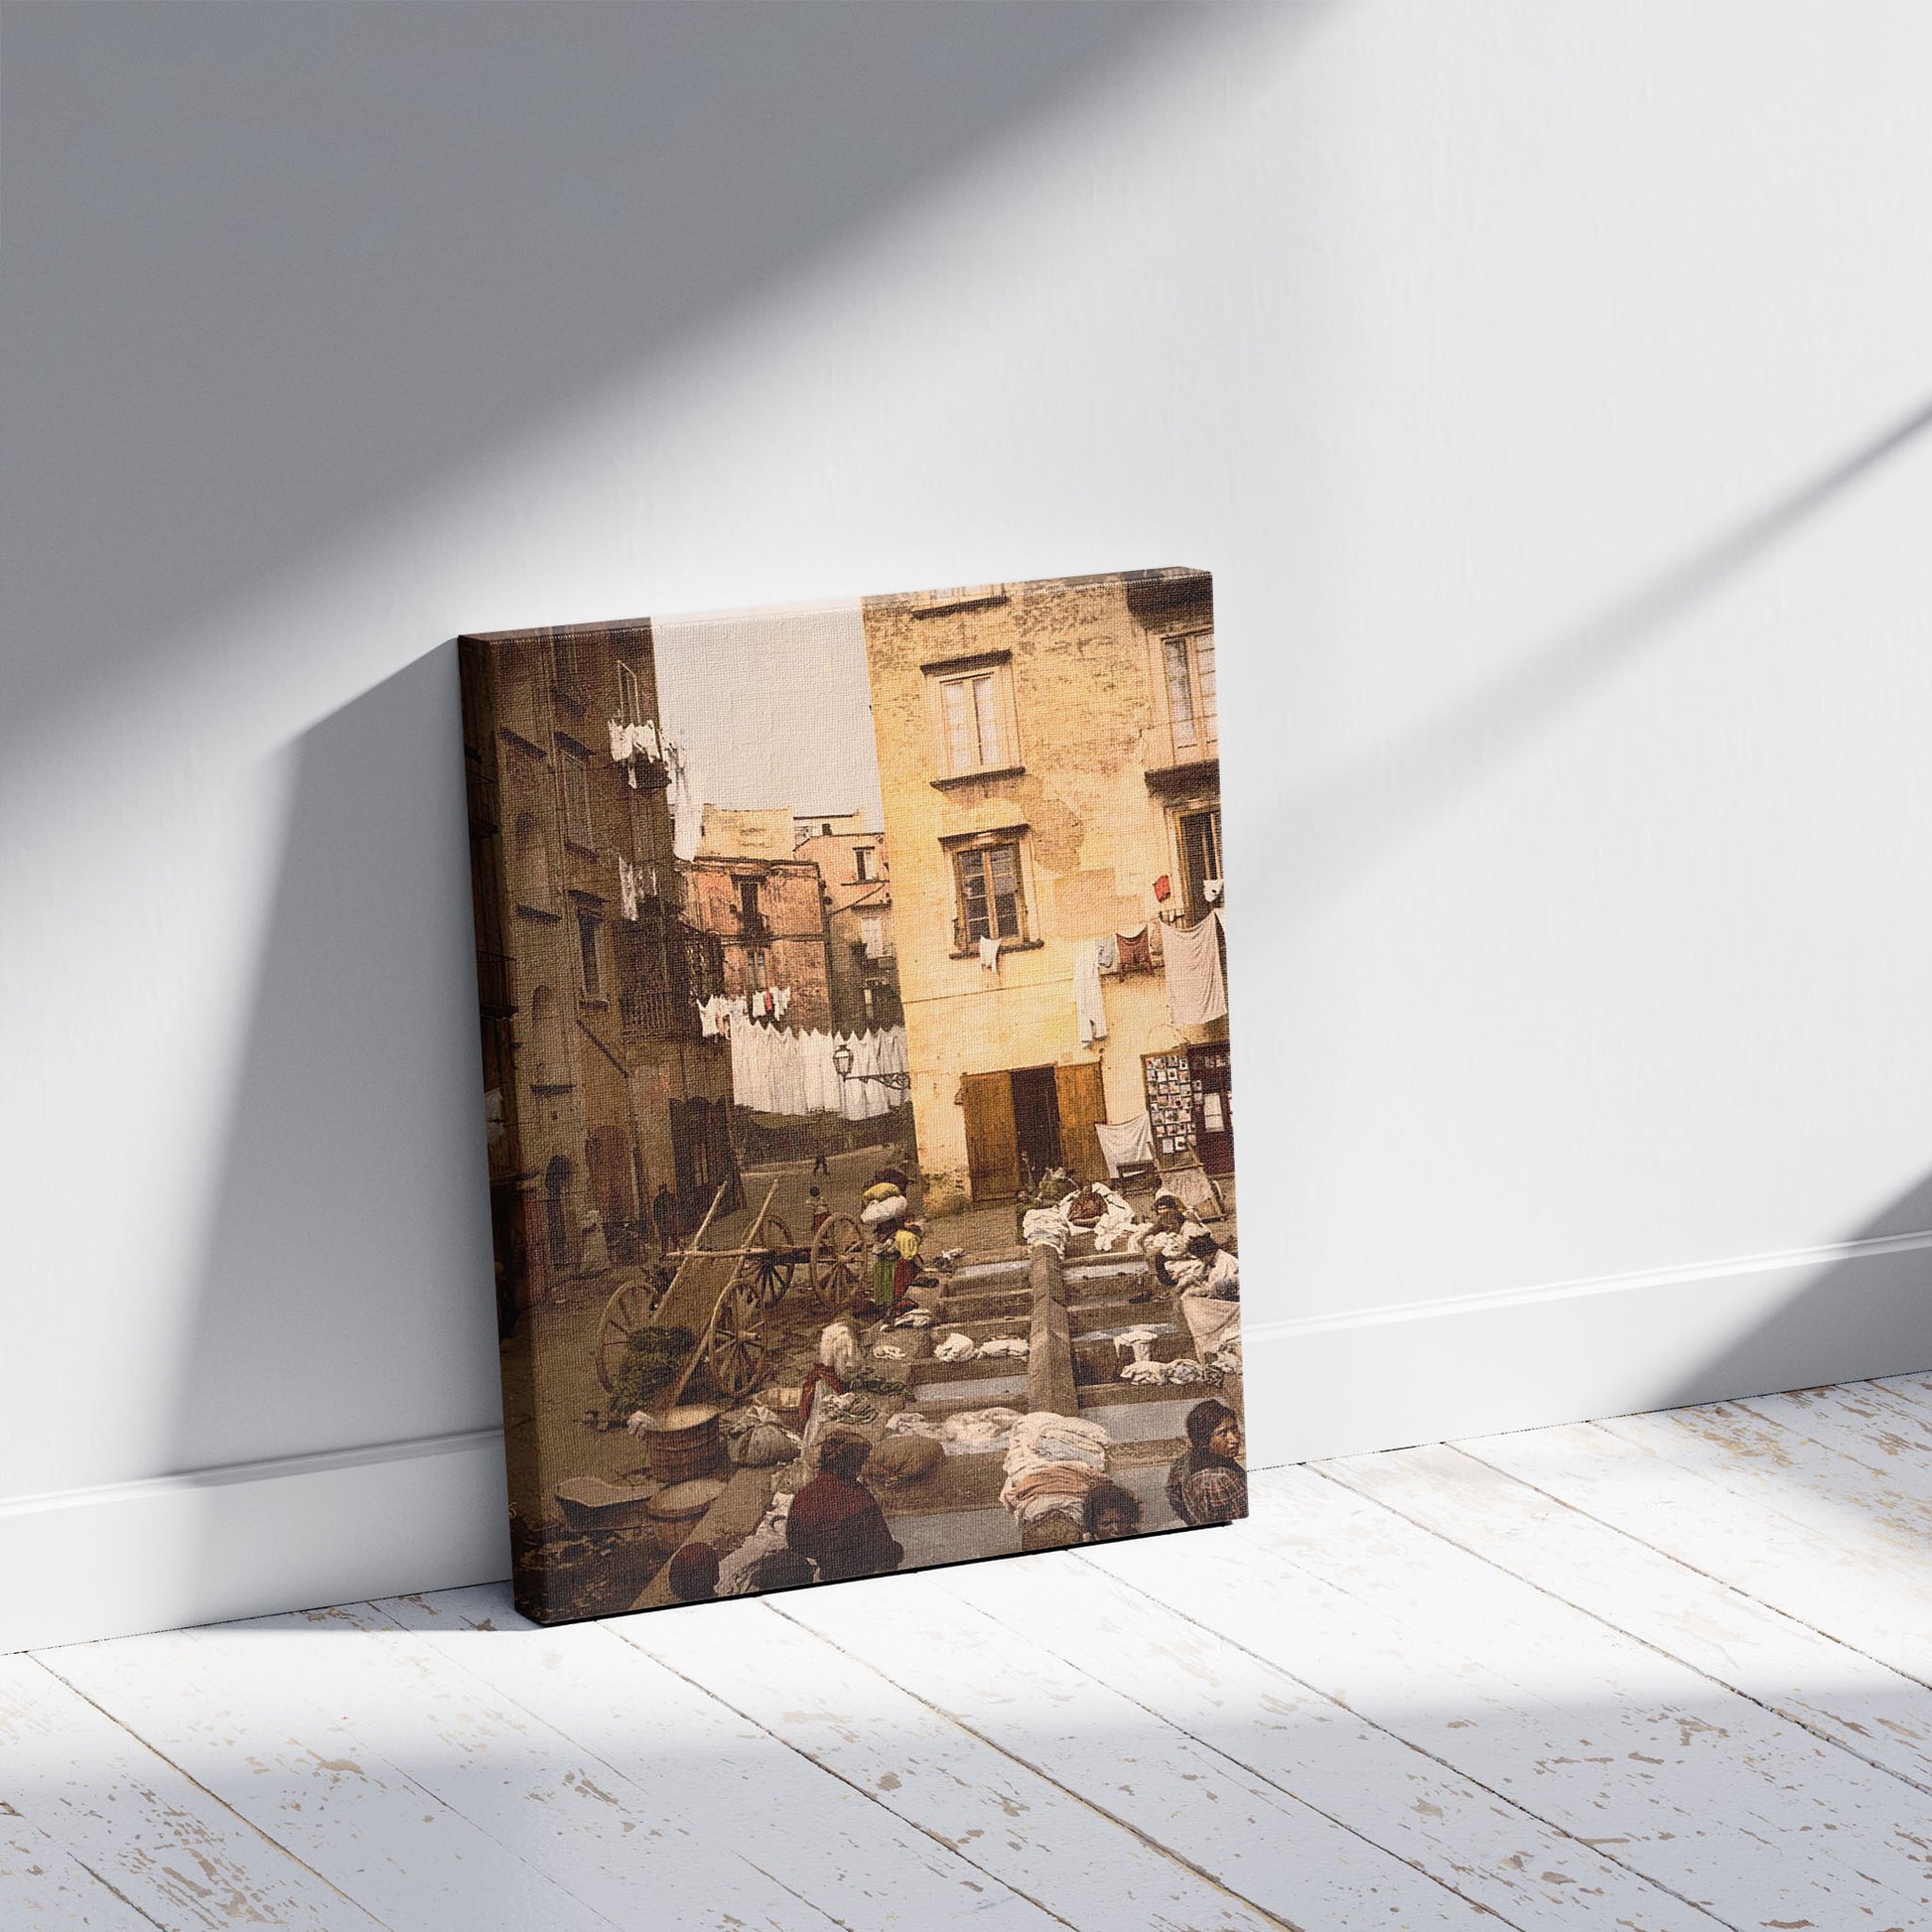 A picture of Street with washerwomen, Naples, Italy, a mockup of the print leaning against a wall